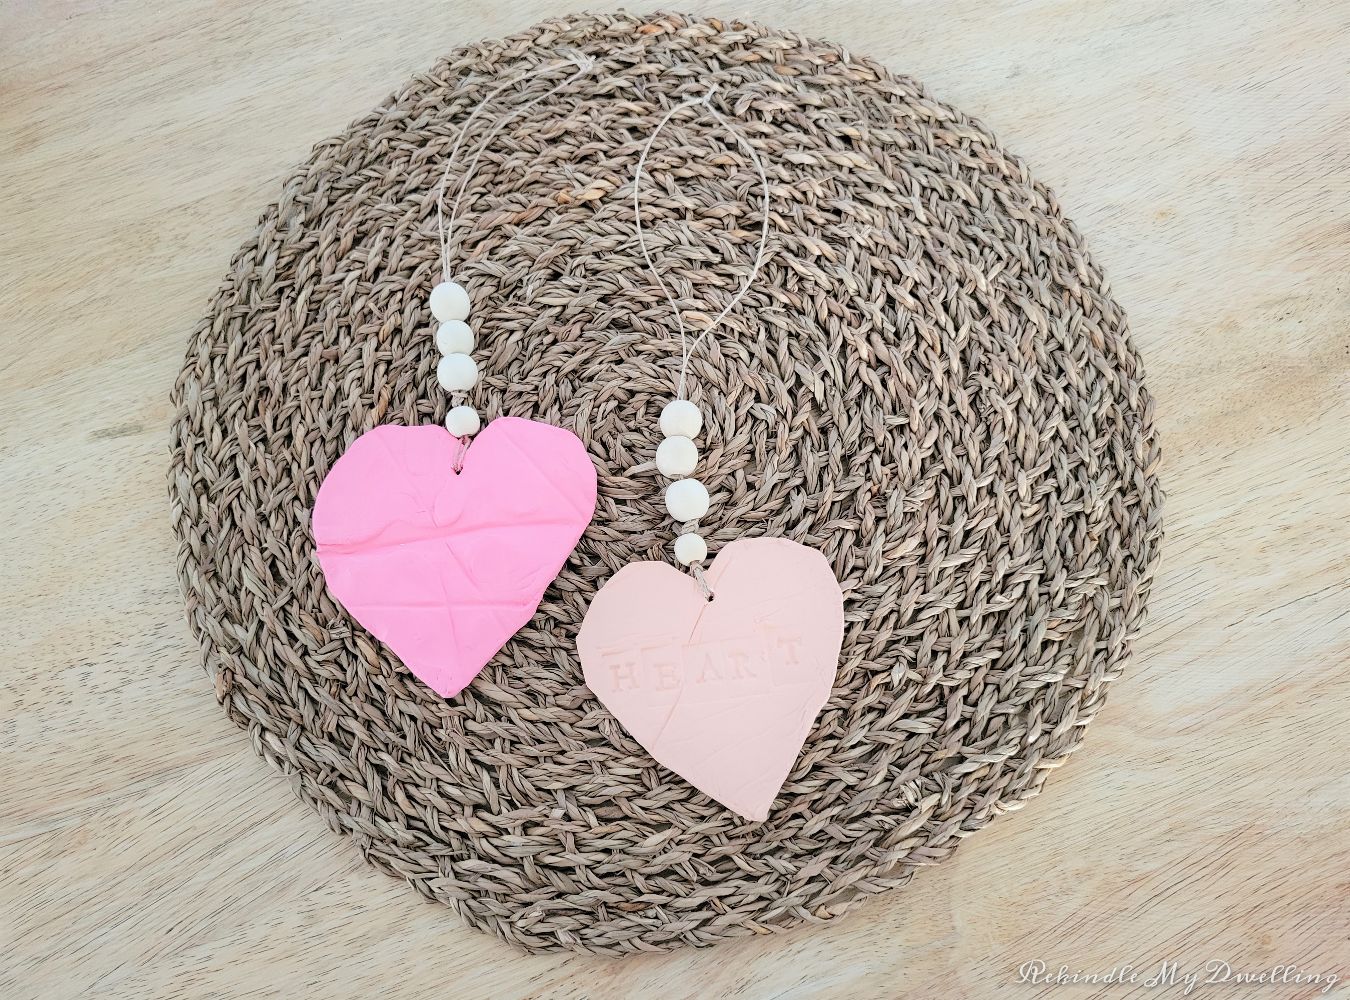 Heart ornaments with wood beads laying on a place mat.